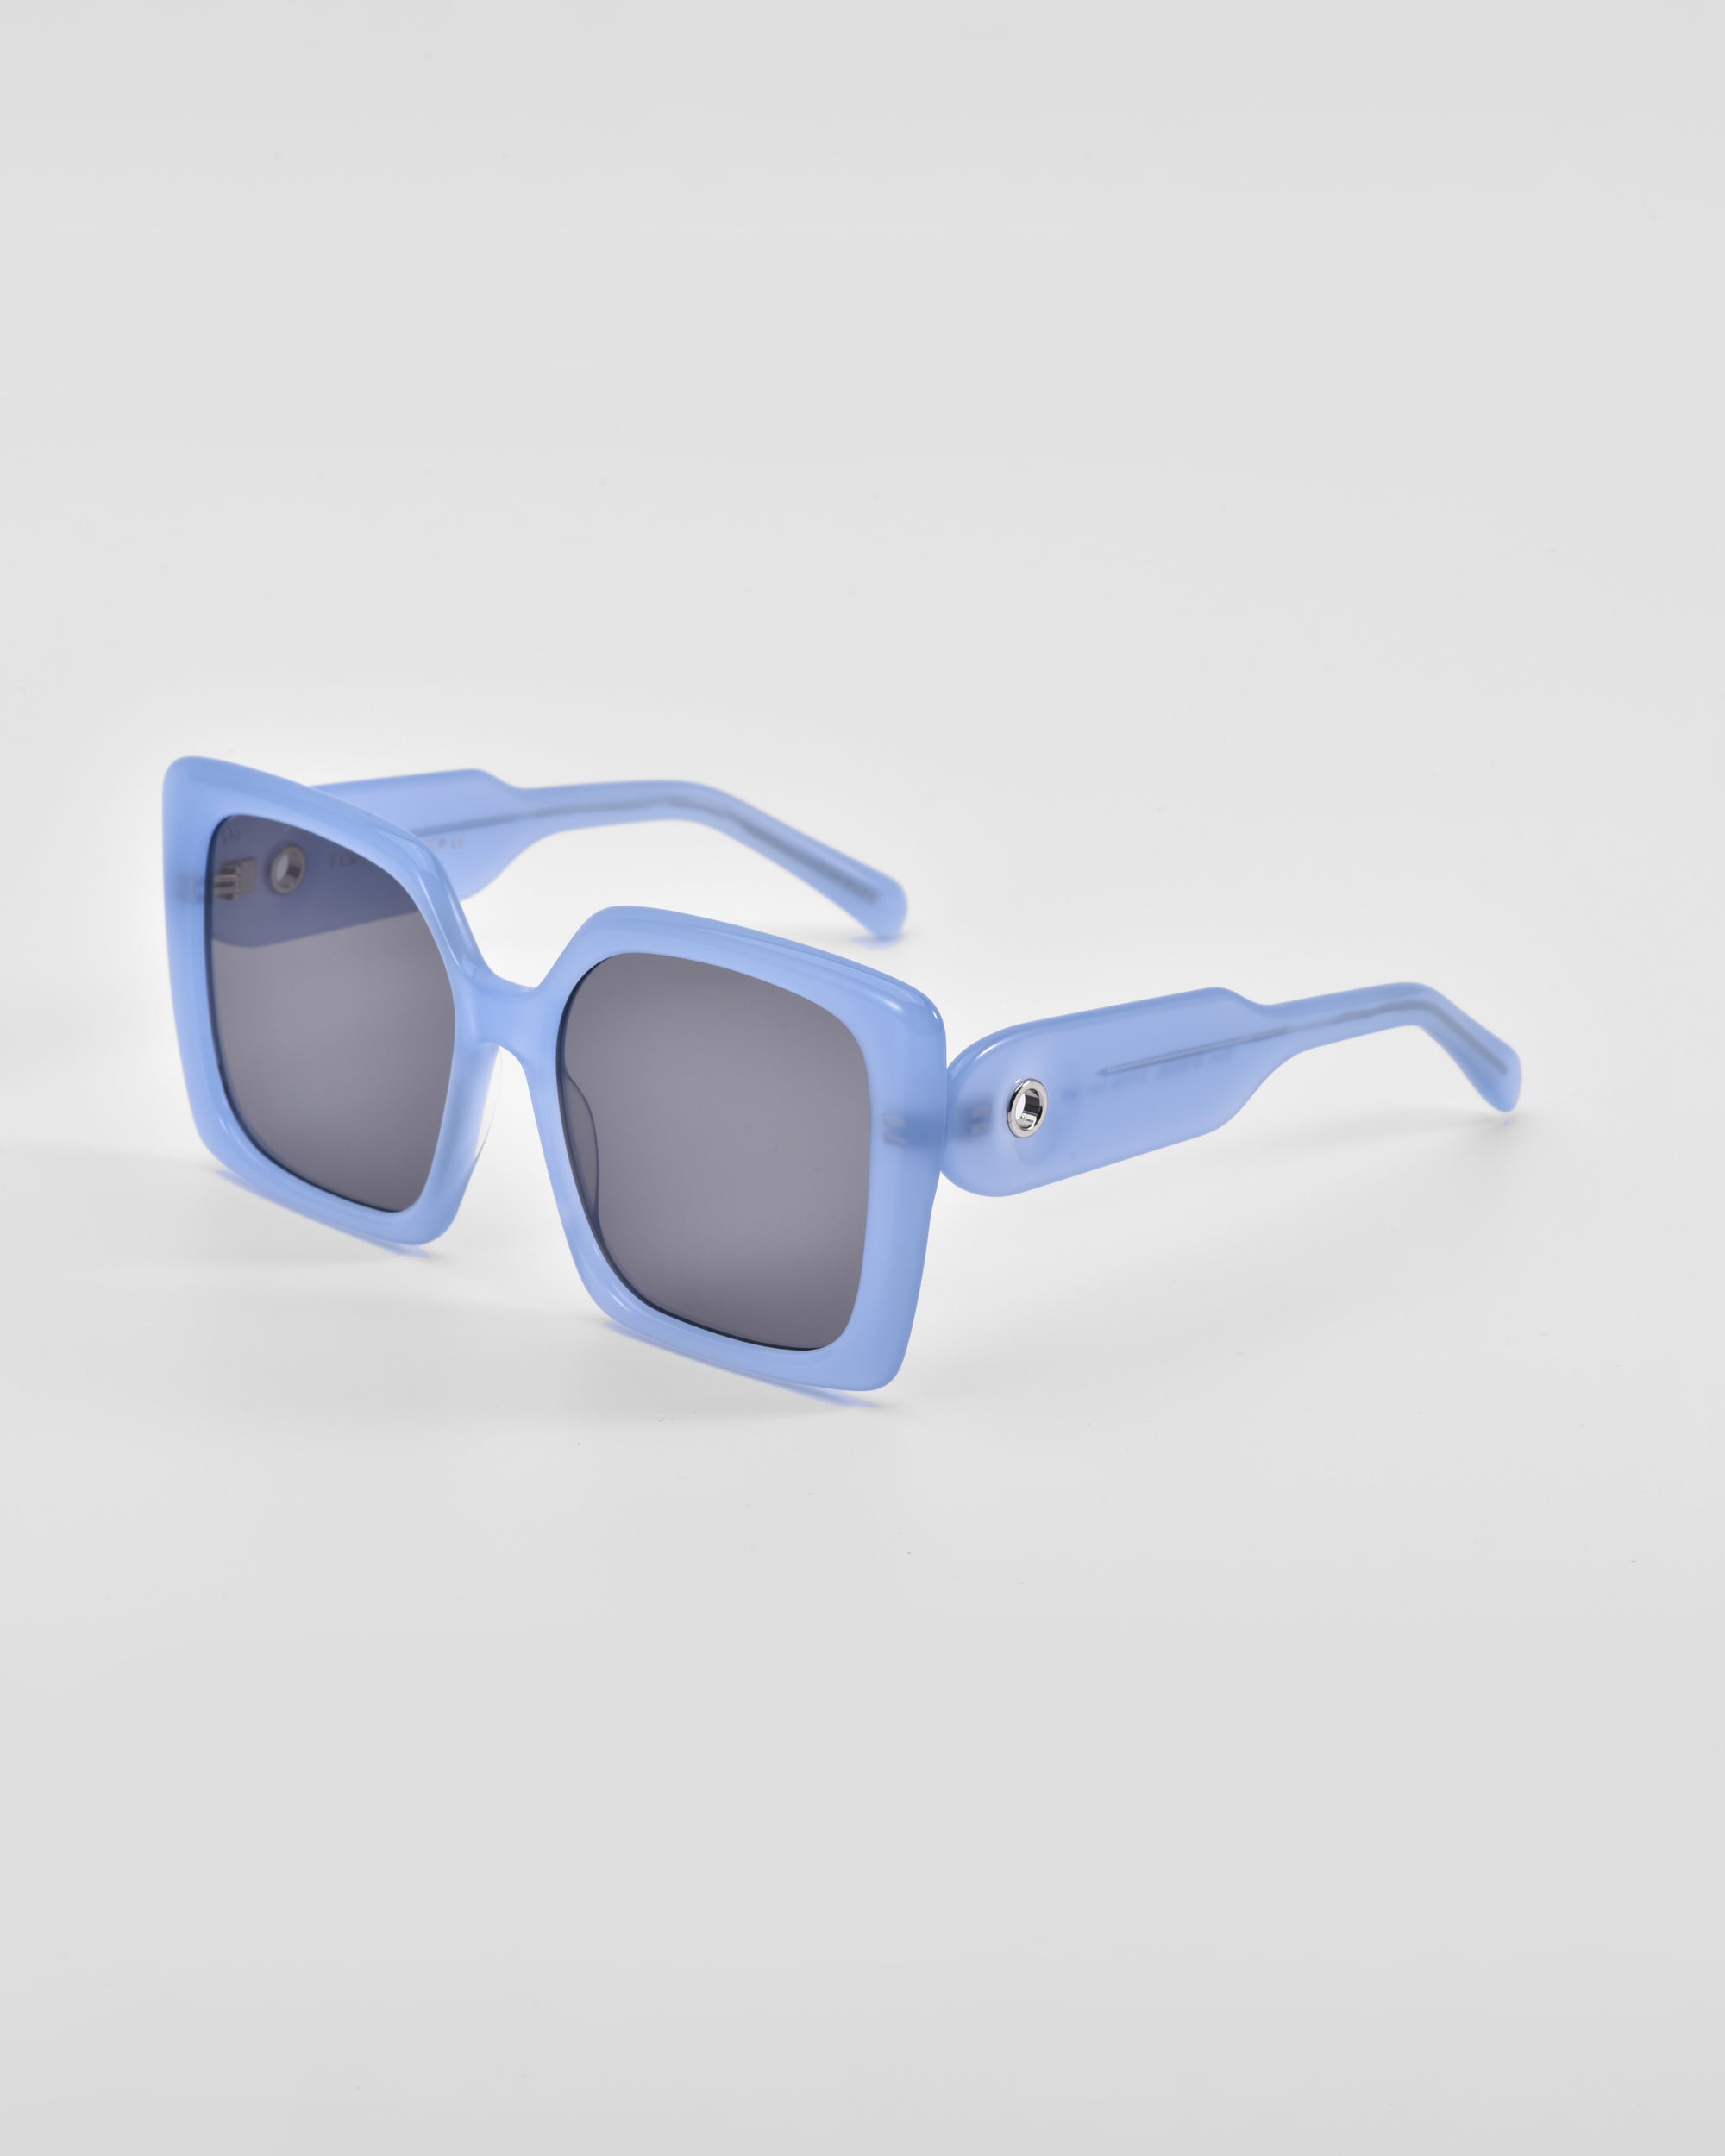 A pair of oversized soft-square Eos sunglasses from For Art&#39;s Sake® with thick, light blue frames and dark gray lenses. The earpieces feature classic temple round details, are slightly curved, and the overall design is modern and stylish. The background is plain white.